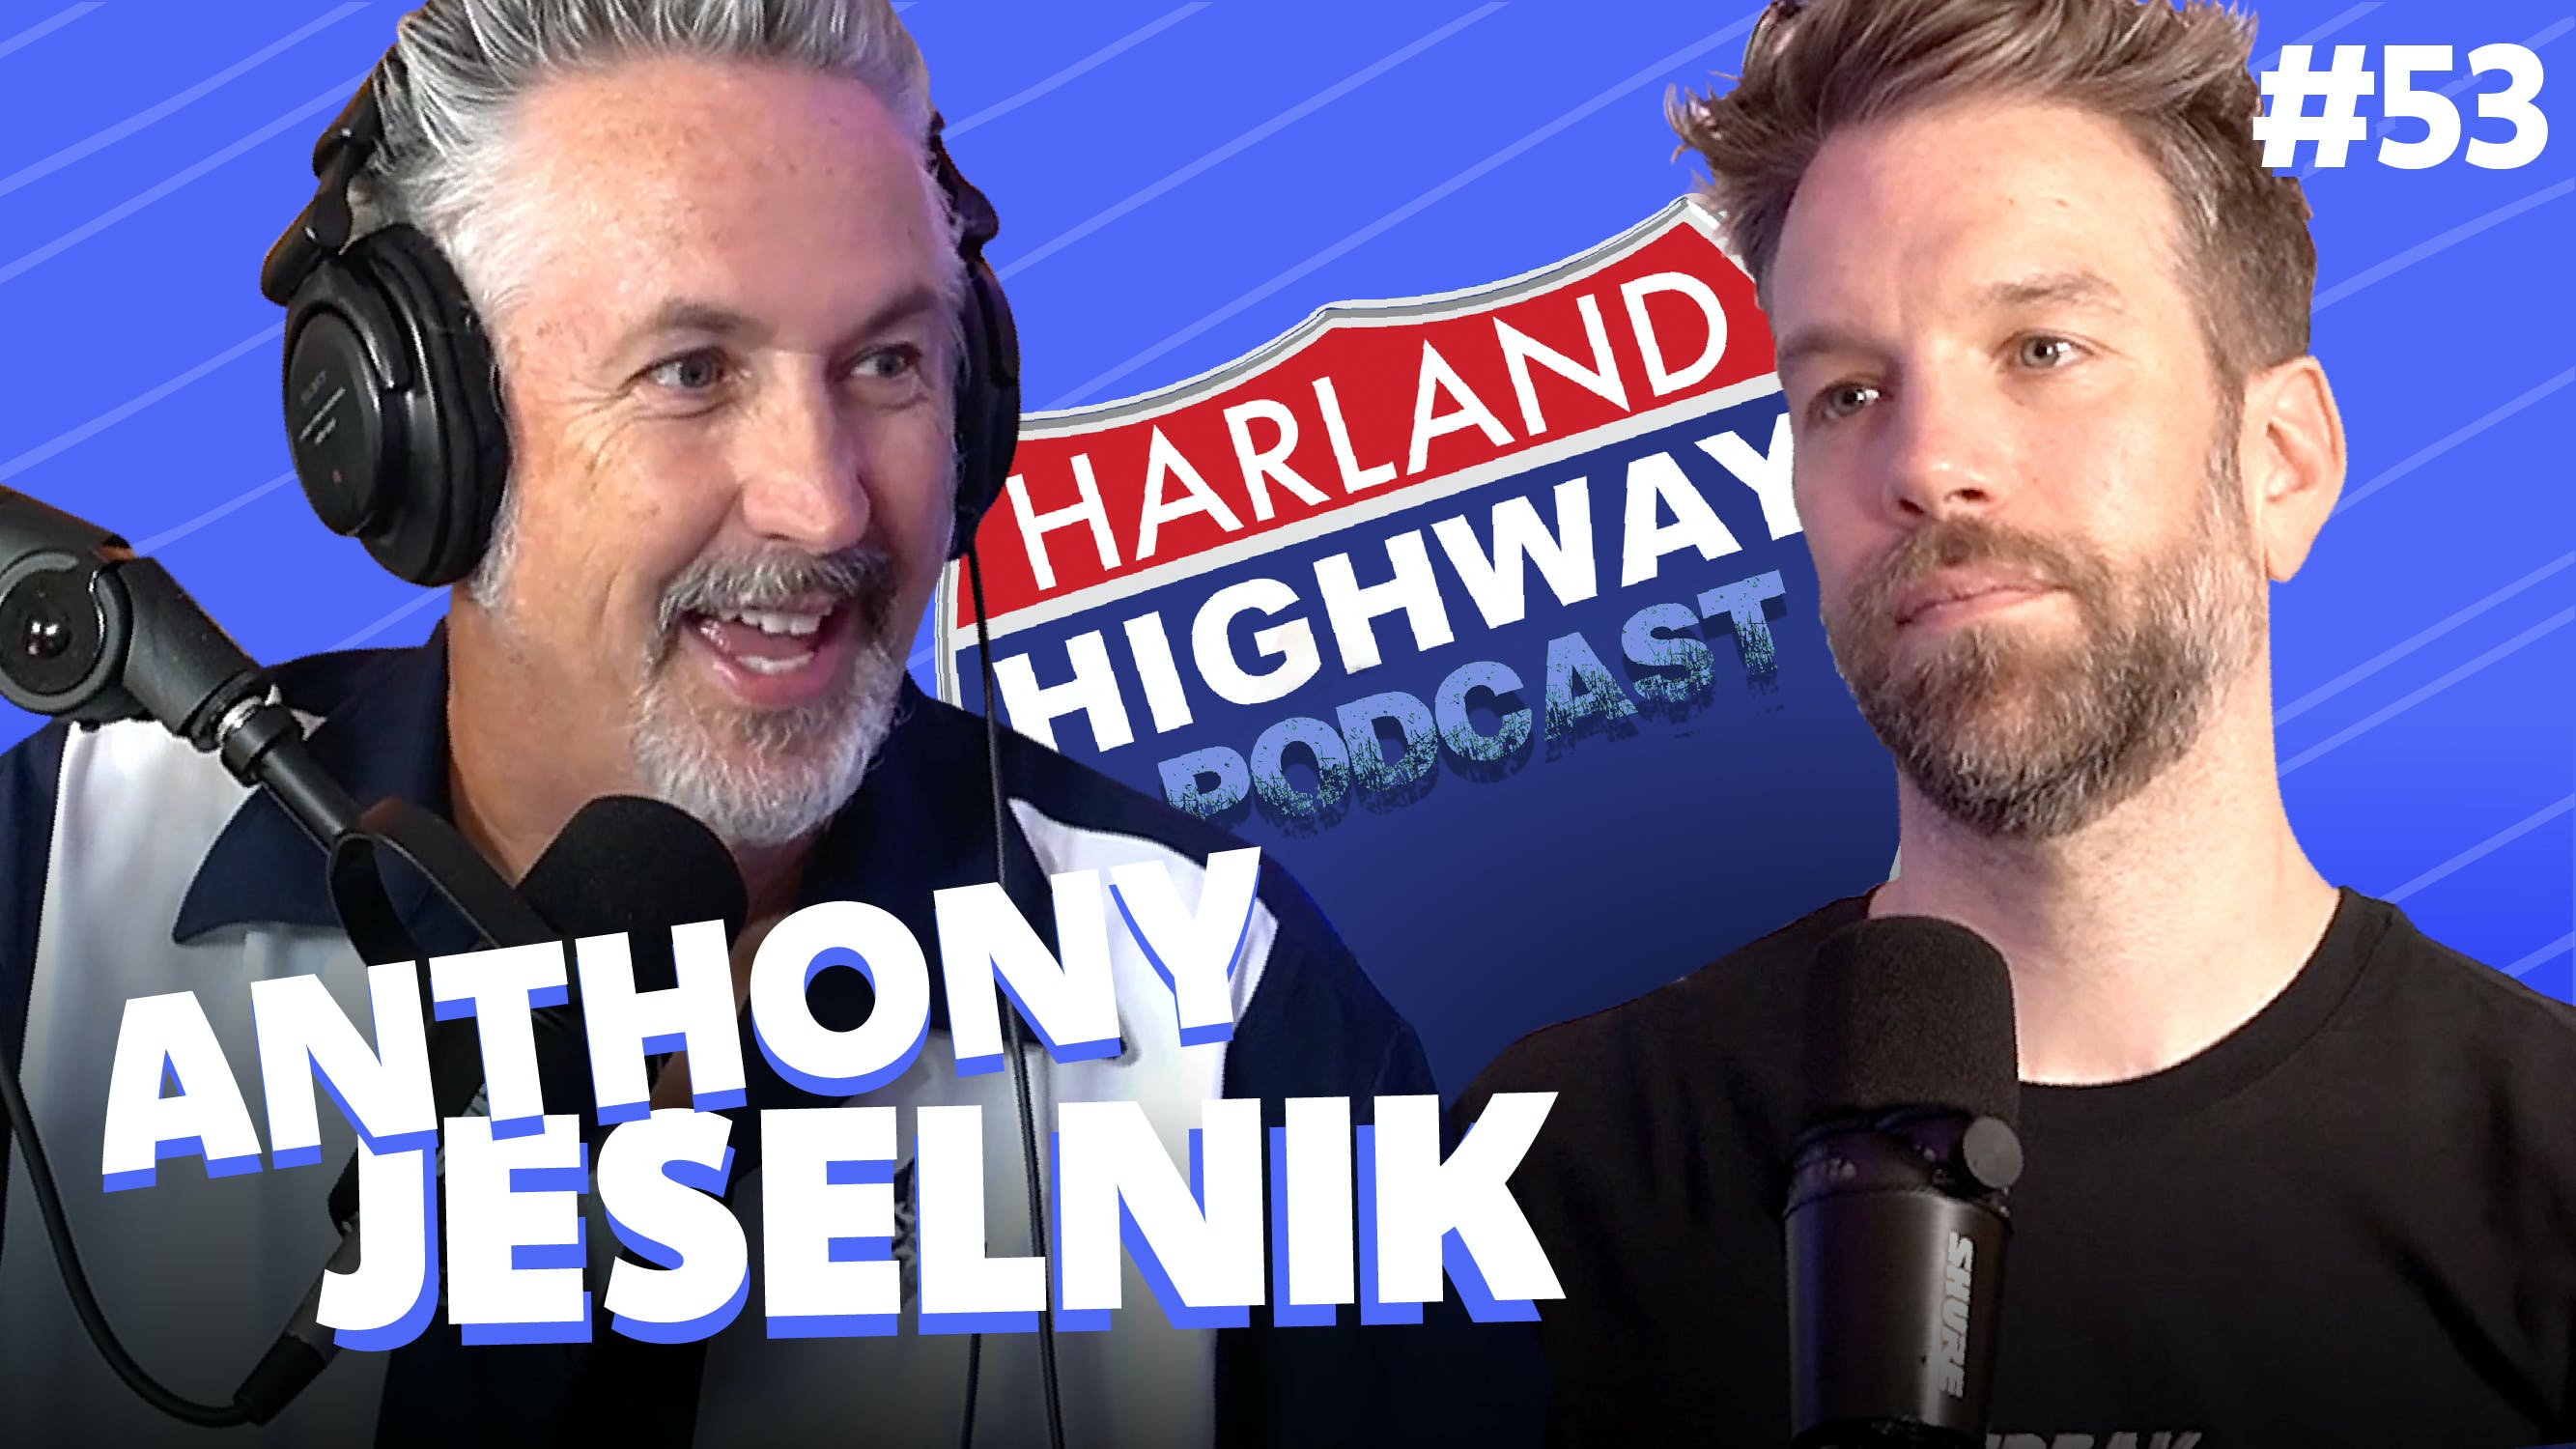 NEW HARLAND HIGHWAY #53 - ANTHONY JESELNIK, Comedian, Actor, Writer, Podcaster.